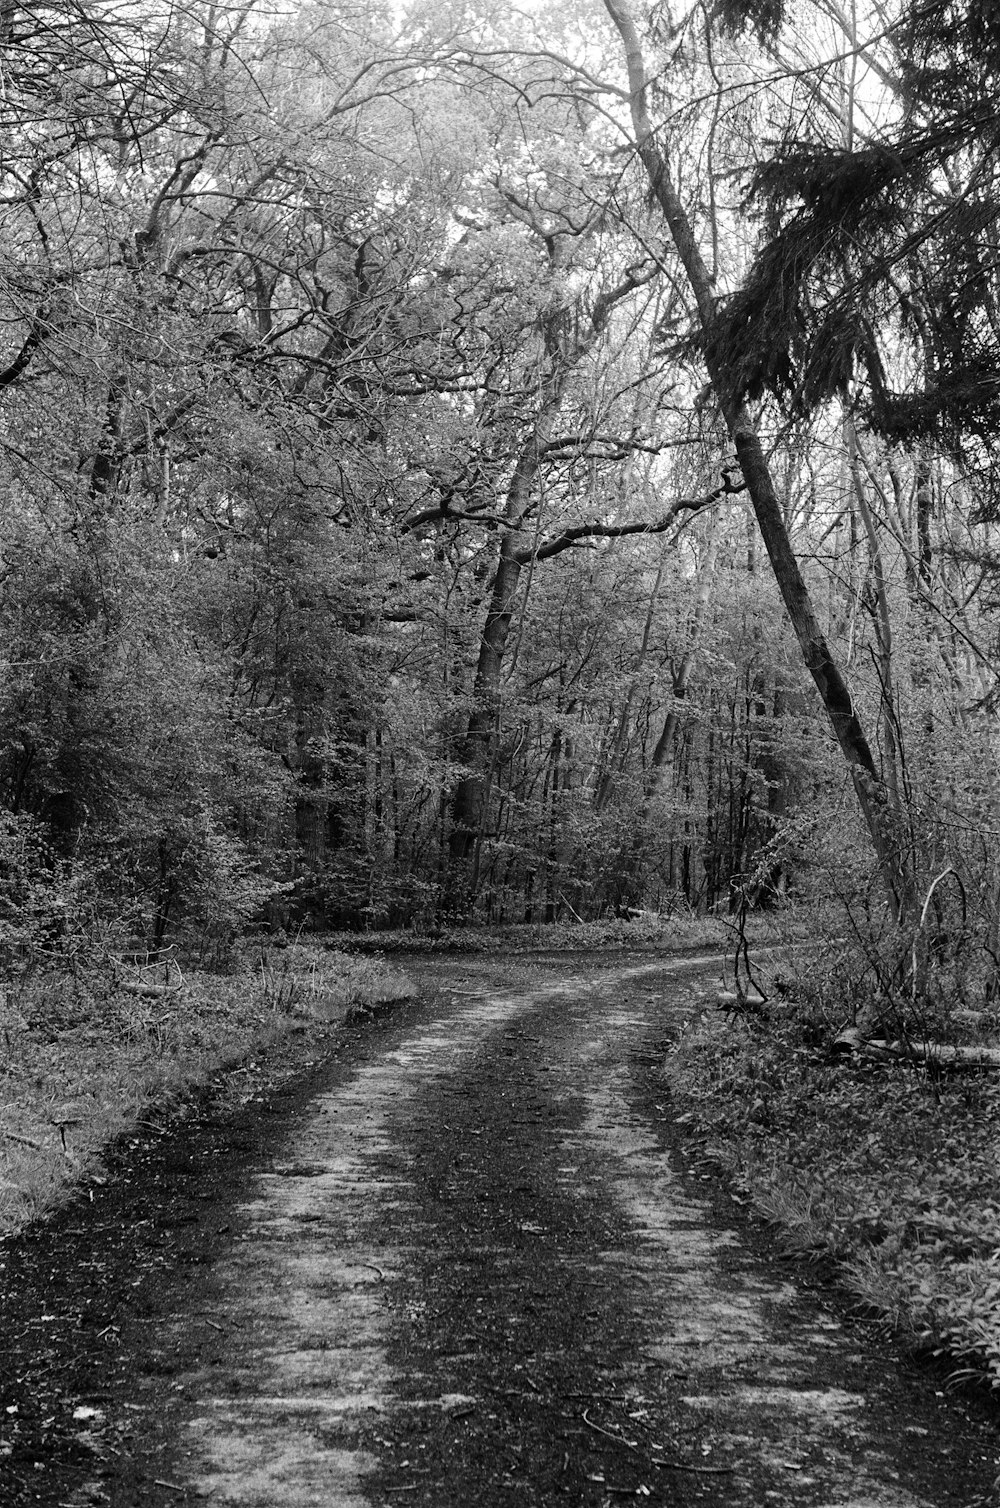 a black and white photo of a dirt road in the woods